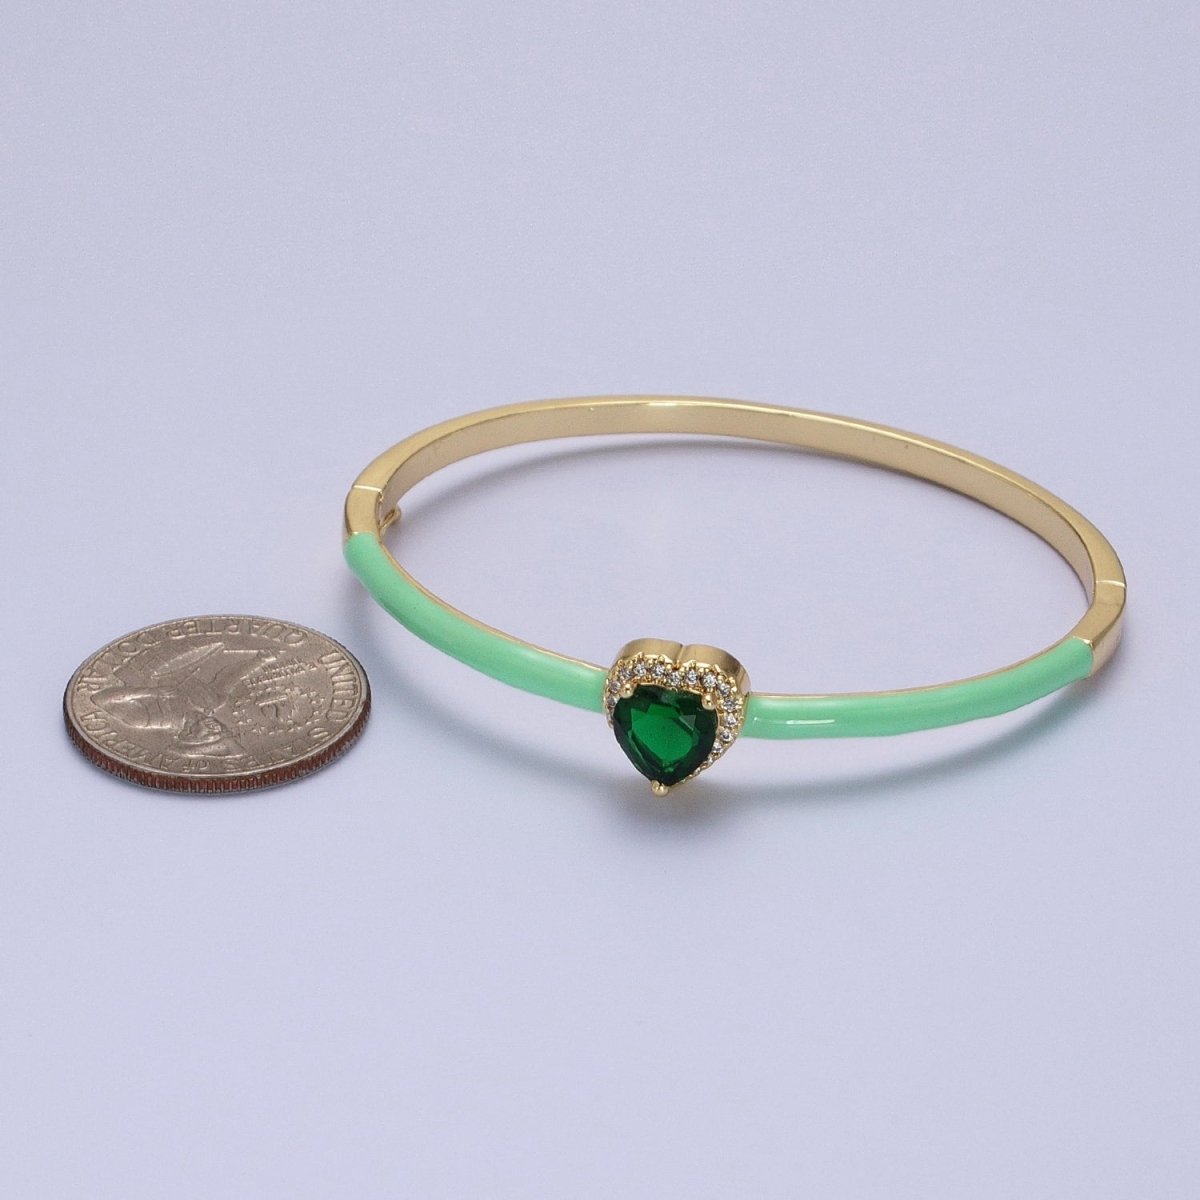 Barbie core Gold Filled Heart White, Green, Pink Micro Paved Enamel Gold Bangle Bracelet | WA-1351 - WA-1353 Clearance Pricing - DLUXCA